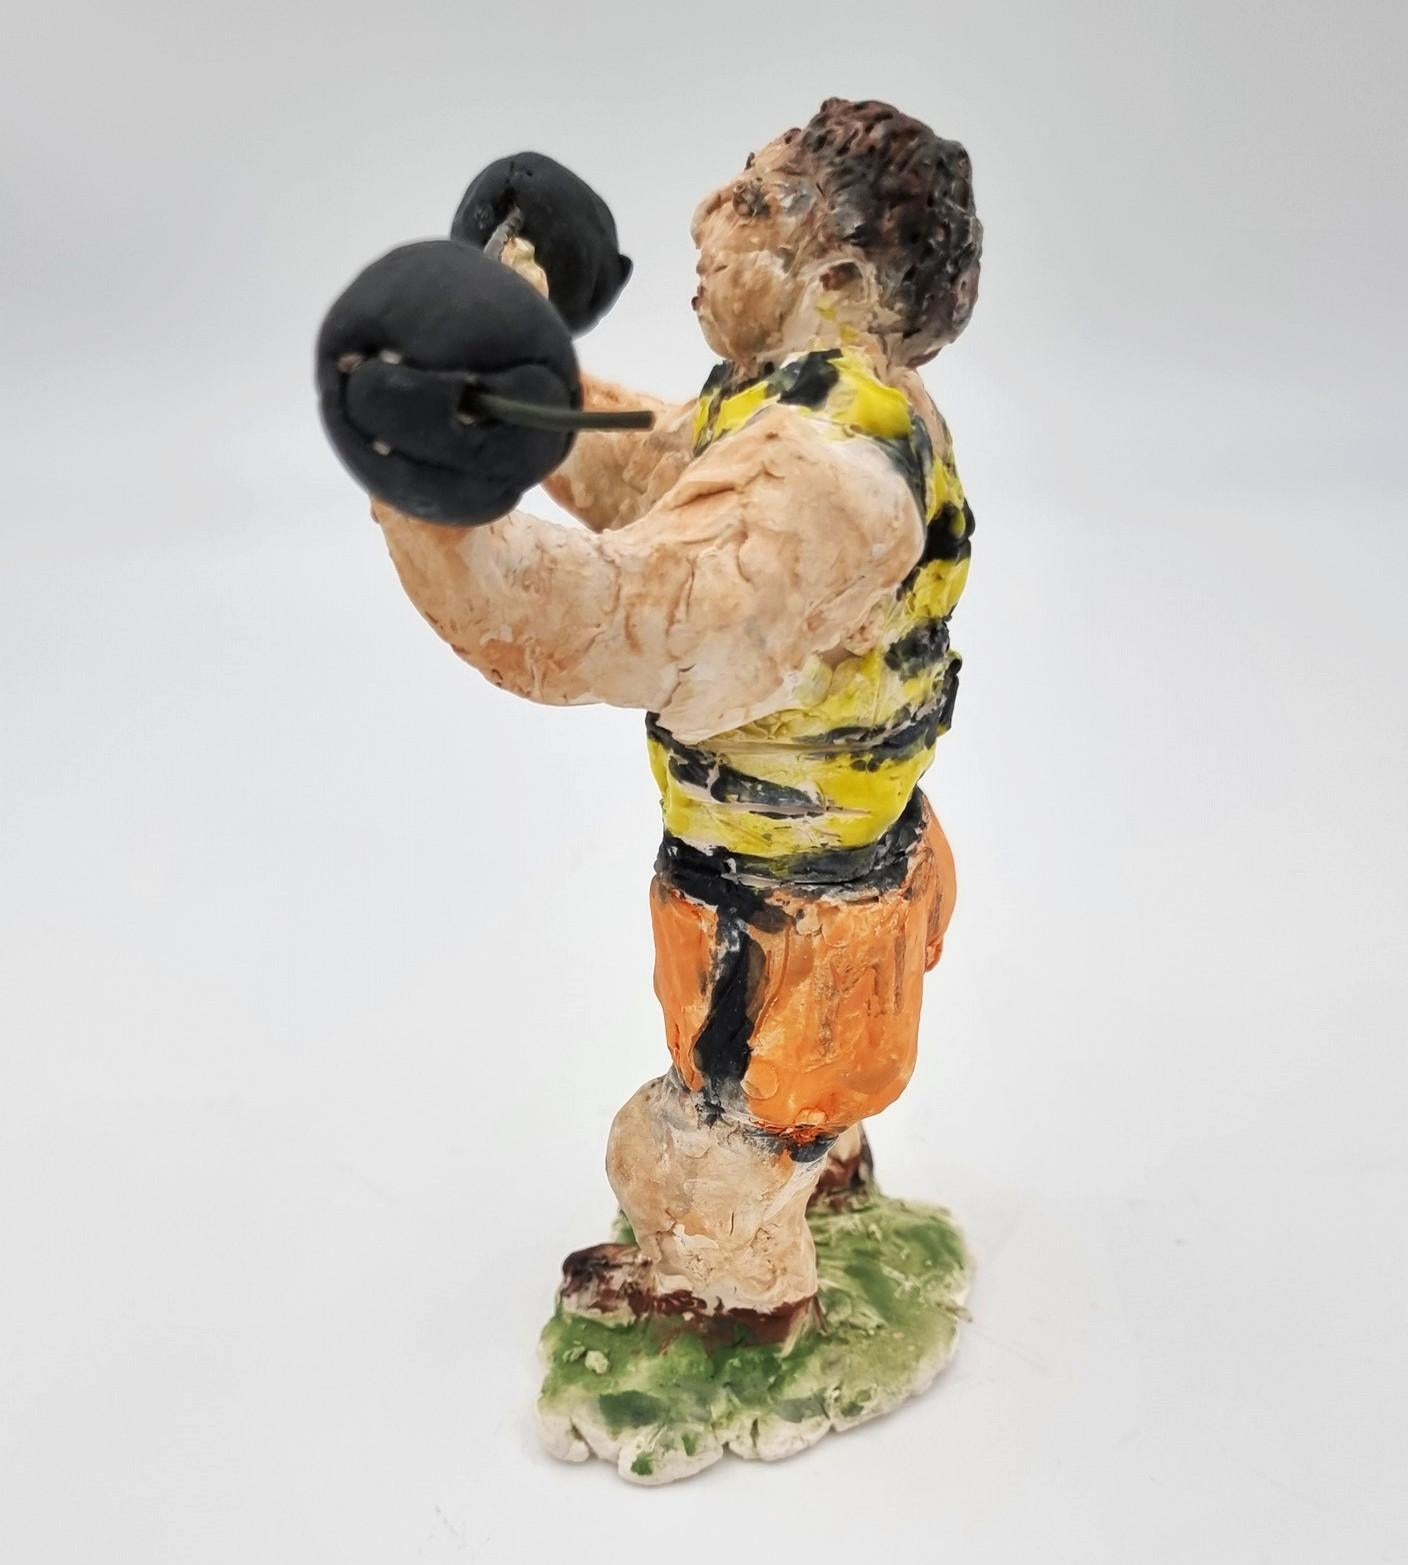 Ann Rothman
Strong Man (Circus, Whimsical, Viola Frey, Delicate, Playful, Fun, Cirque du Soleil, The Ringling Bros., Barnum & Bailey)
2021
Porcelain, Low Fire Glazes, Crayons, Watercolors
Fired Cone 06, 04
10 x 3.5 x 5 inches
COA provided
Ref.: